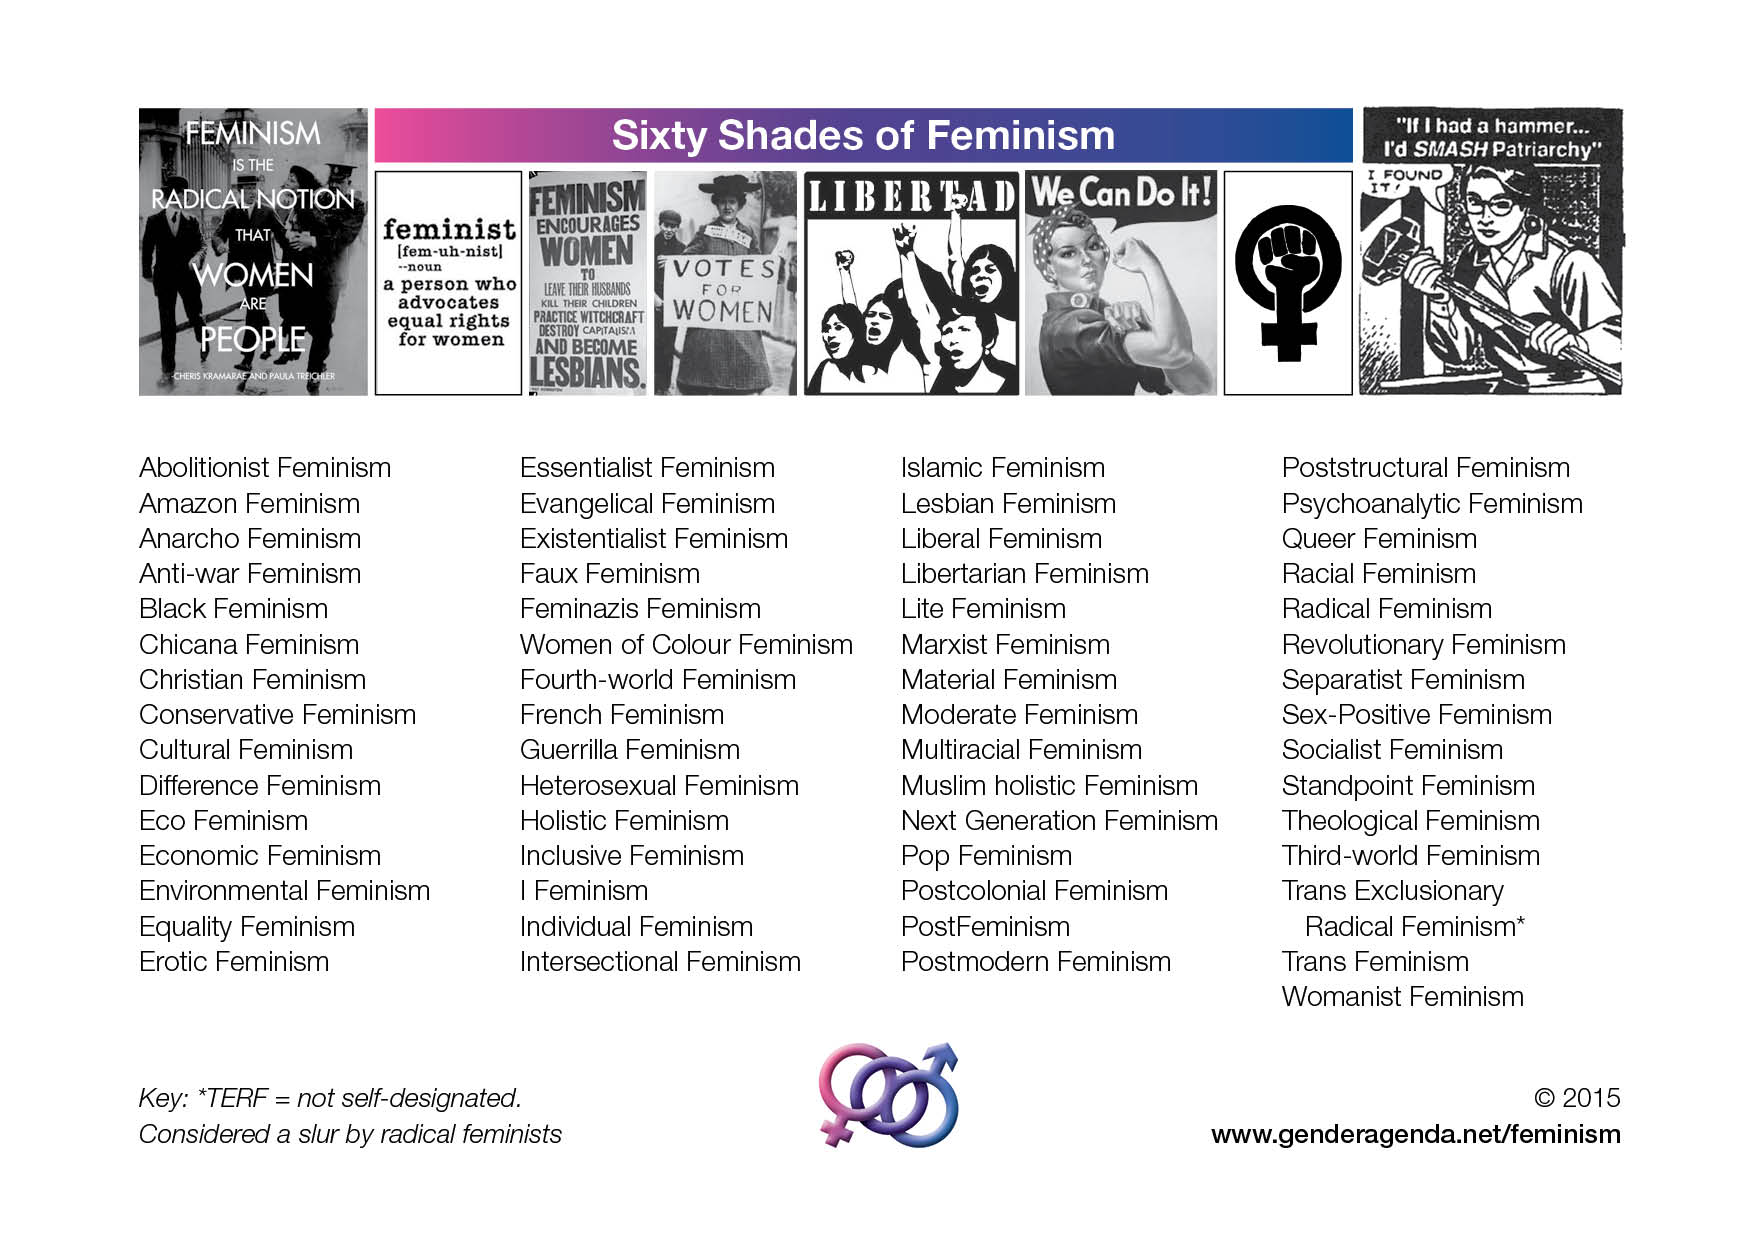 Table of Types of Feminism